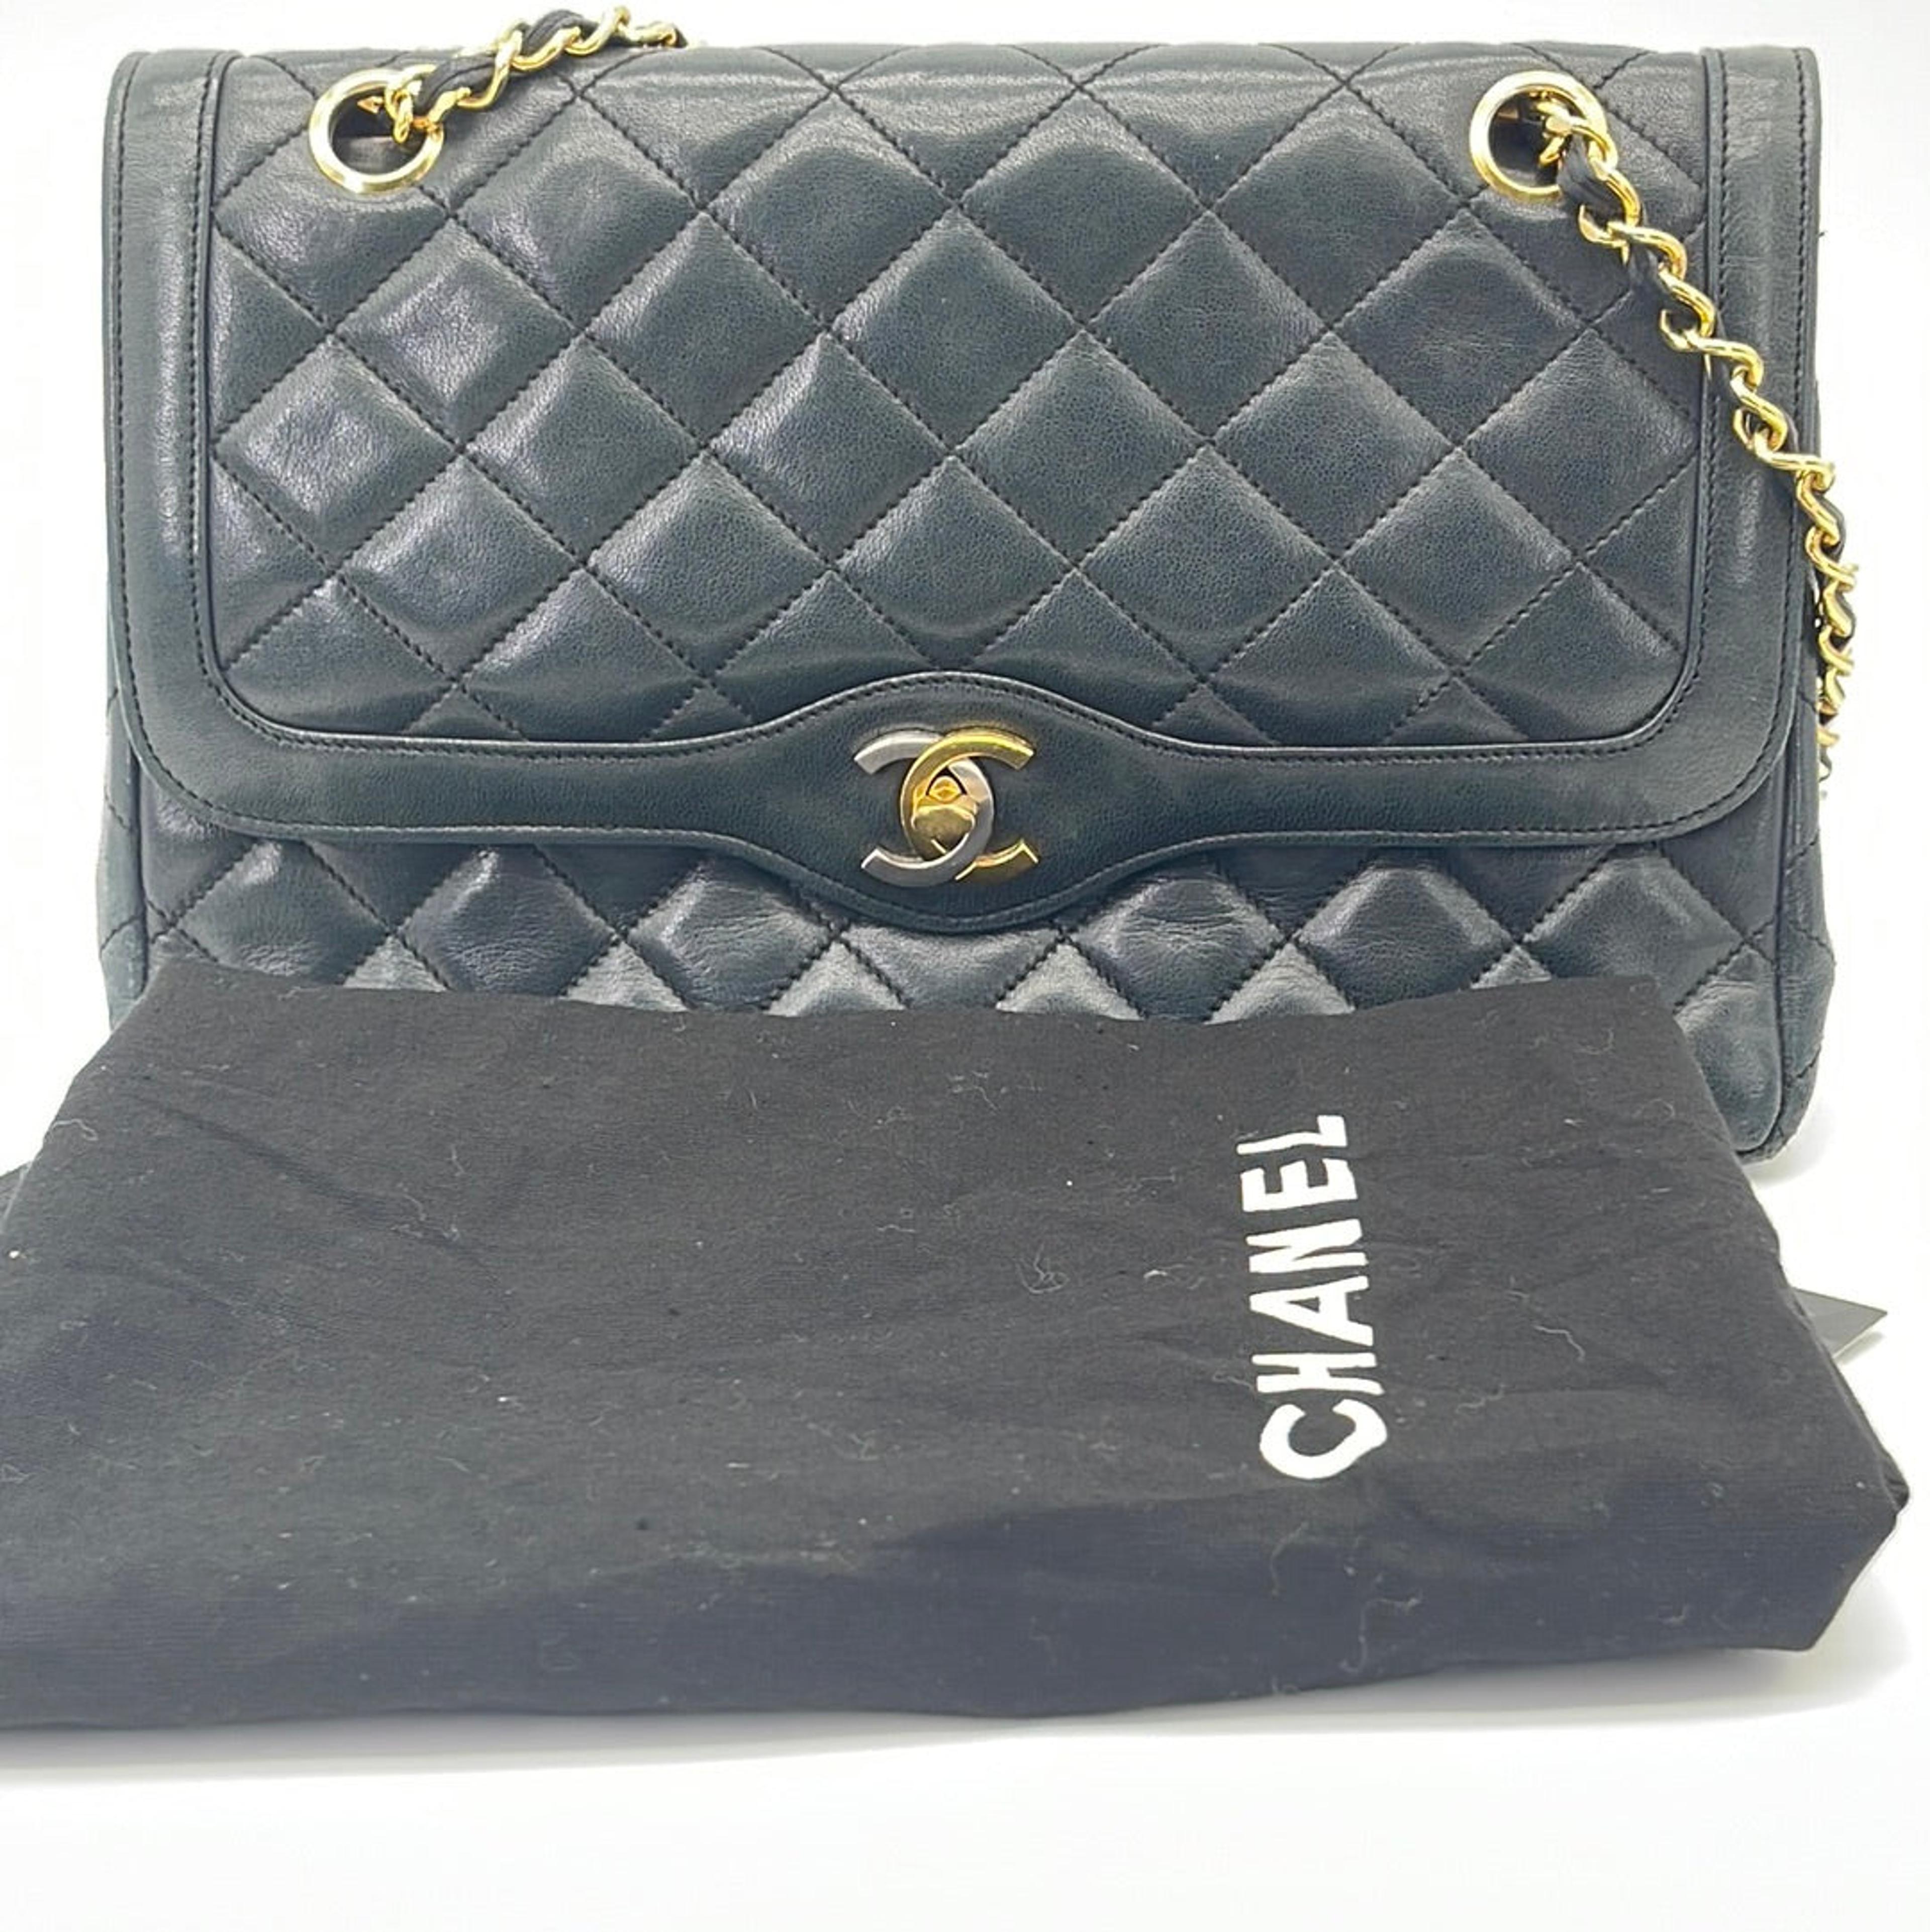 NTWRK - Vintage CHANEL Paris Limited Double Flap Quilted Black Lambskin